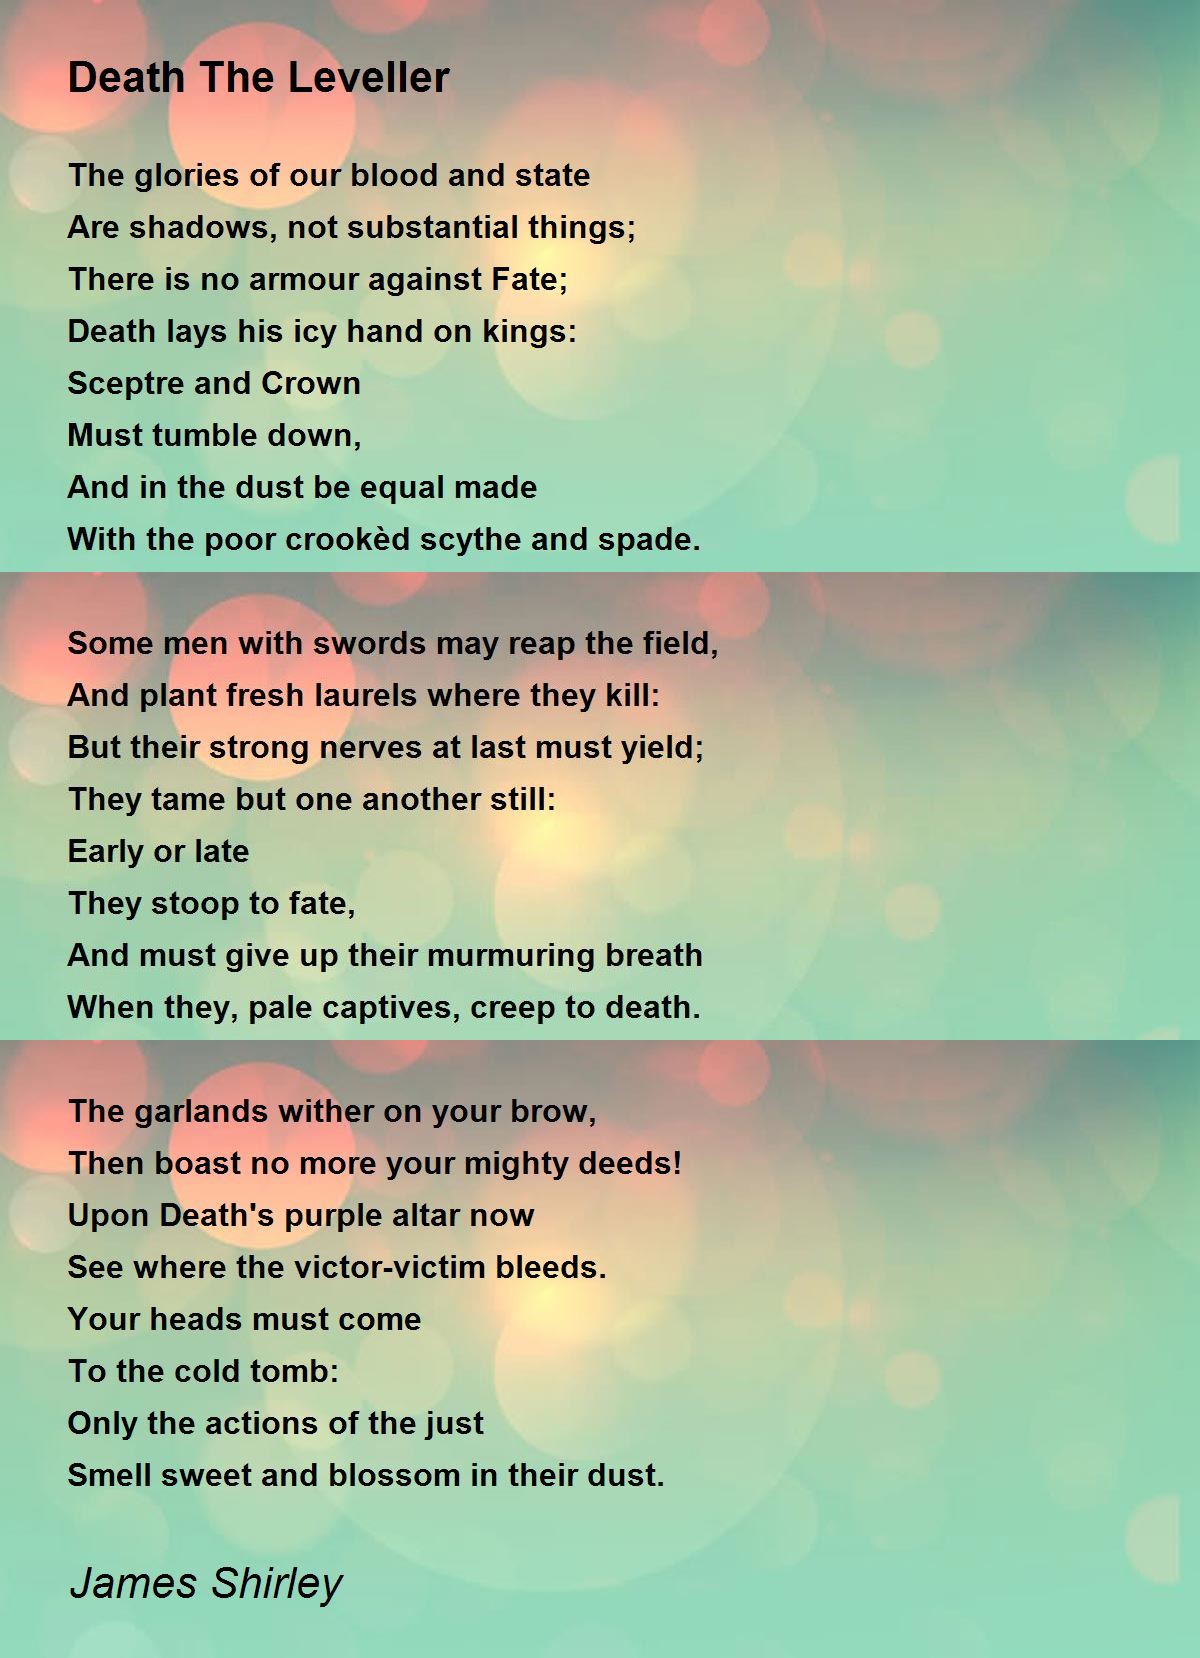 Analysis Of The Poem The Dead By